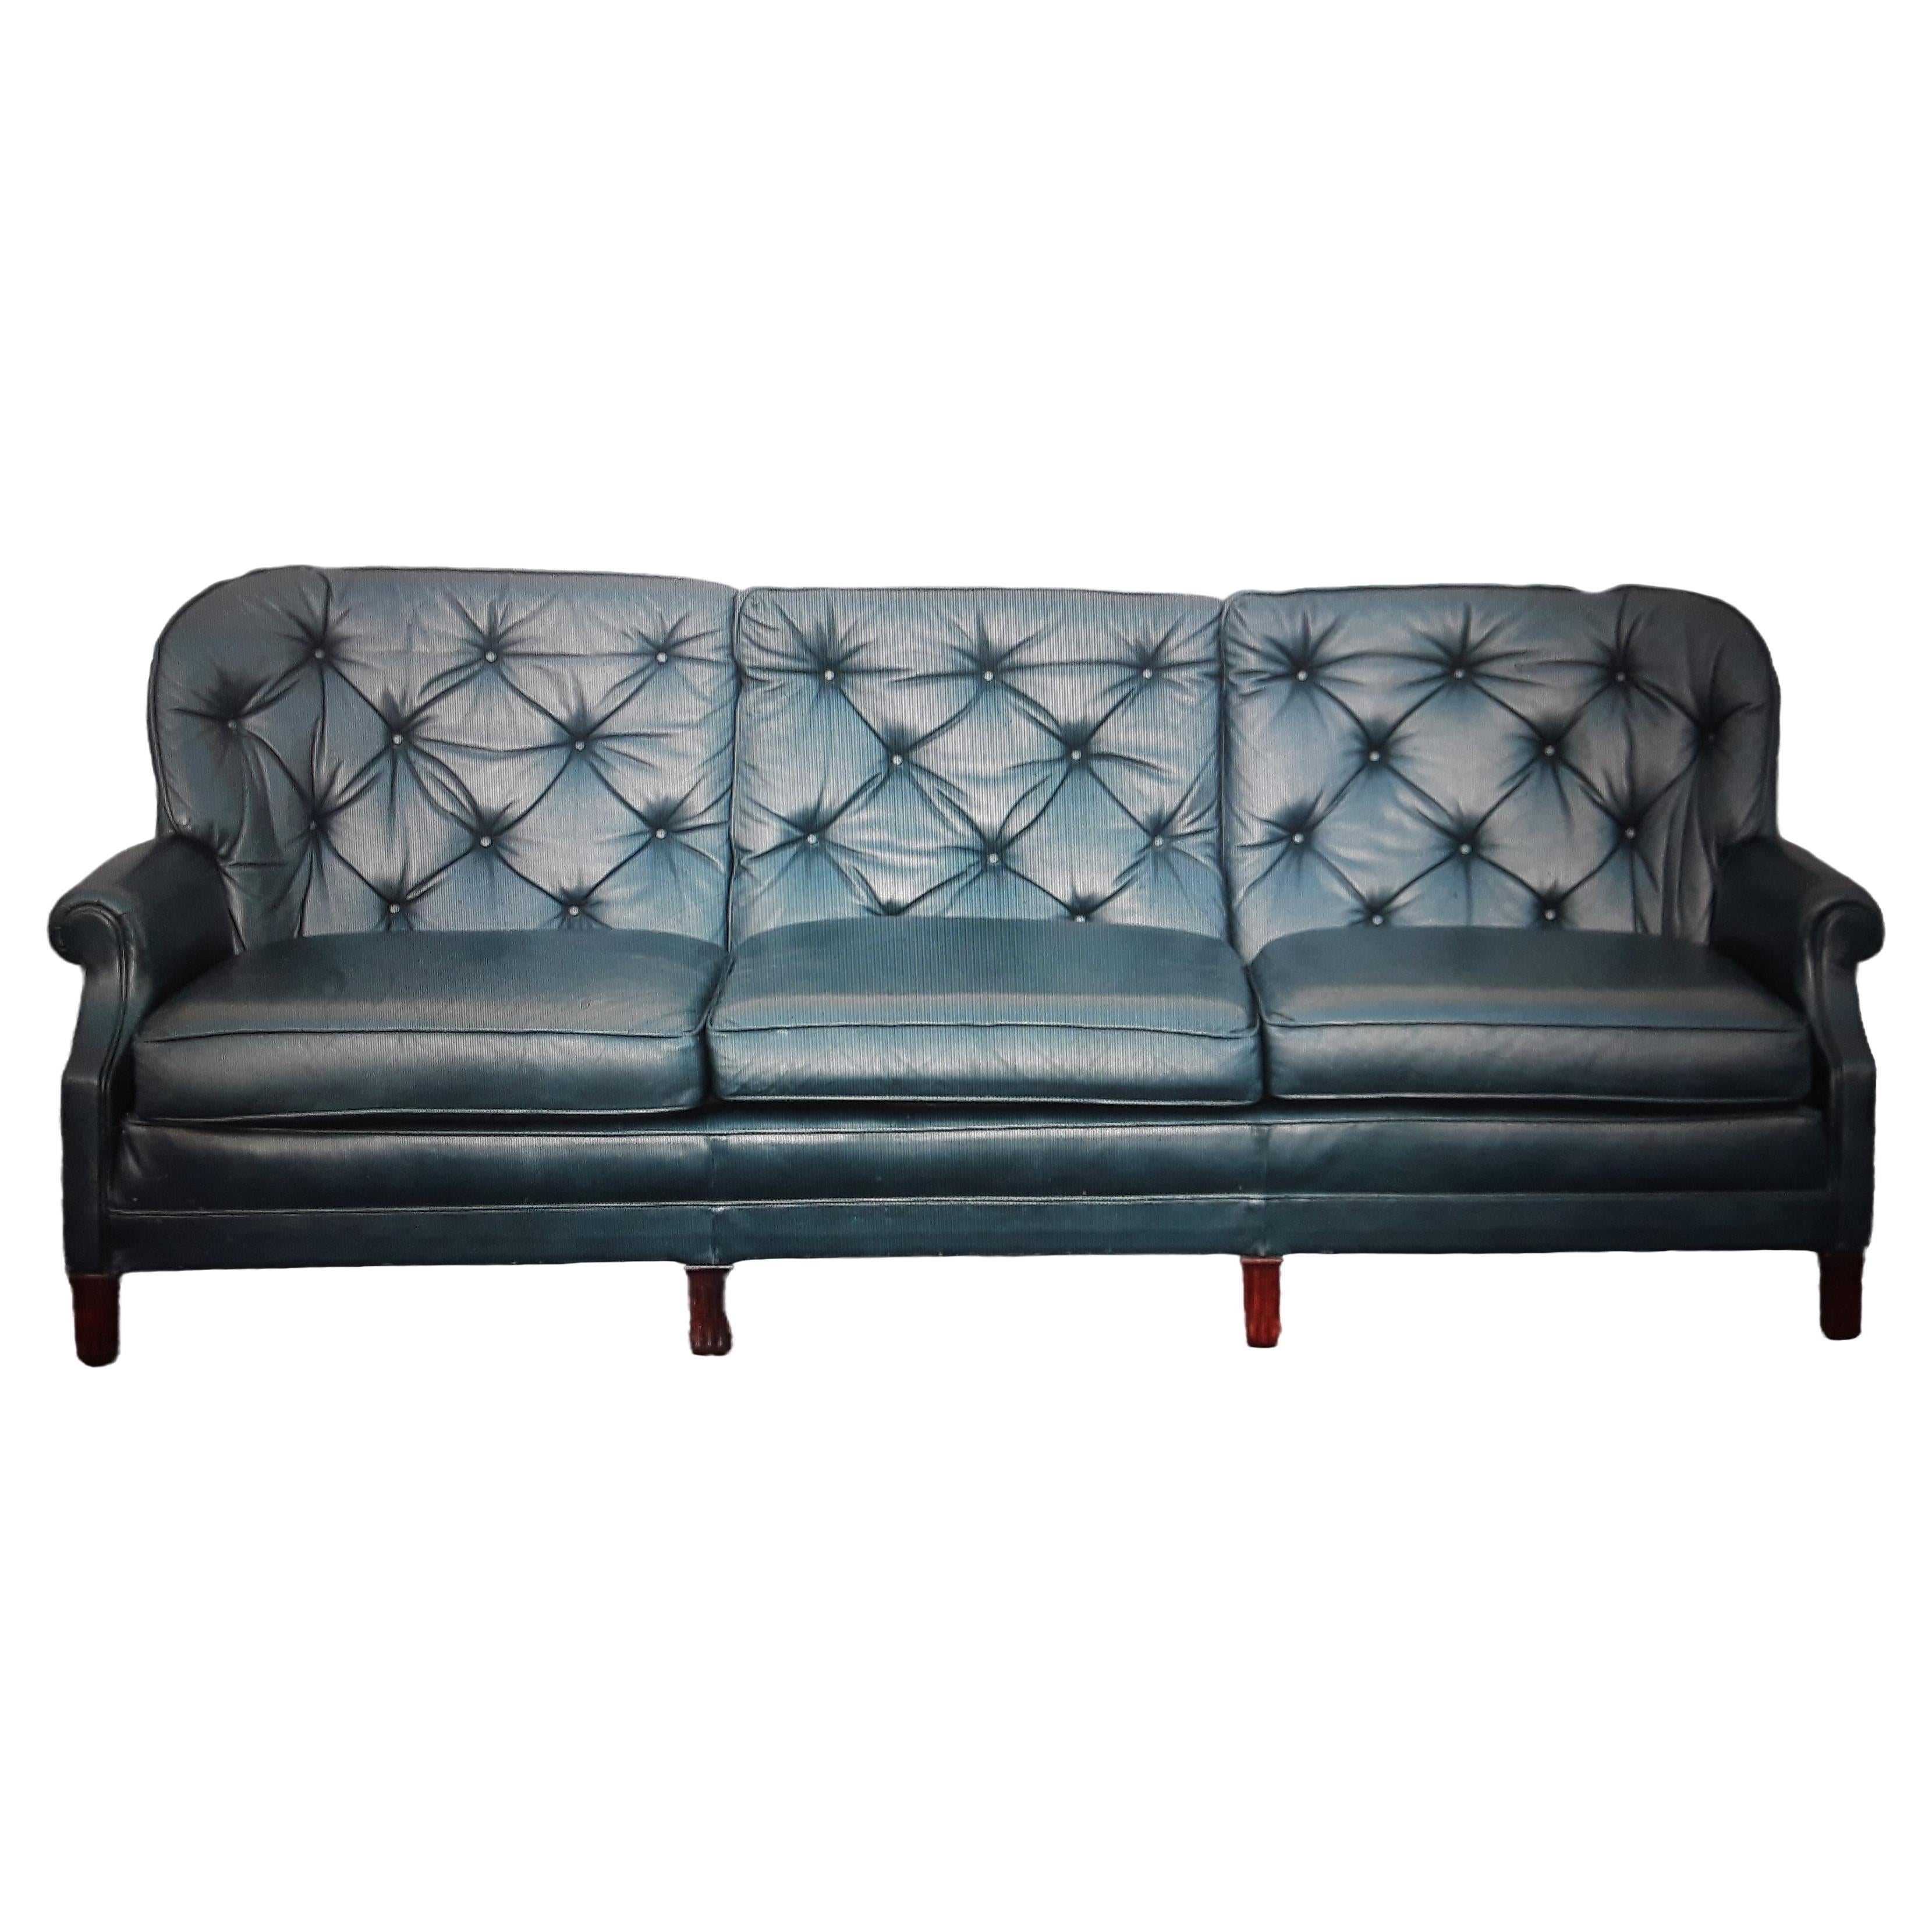 1960's Classic Mid Century Modern Blue Leather Chesterfield style Sofa